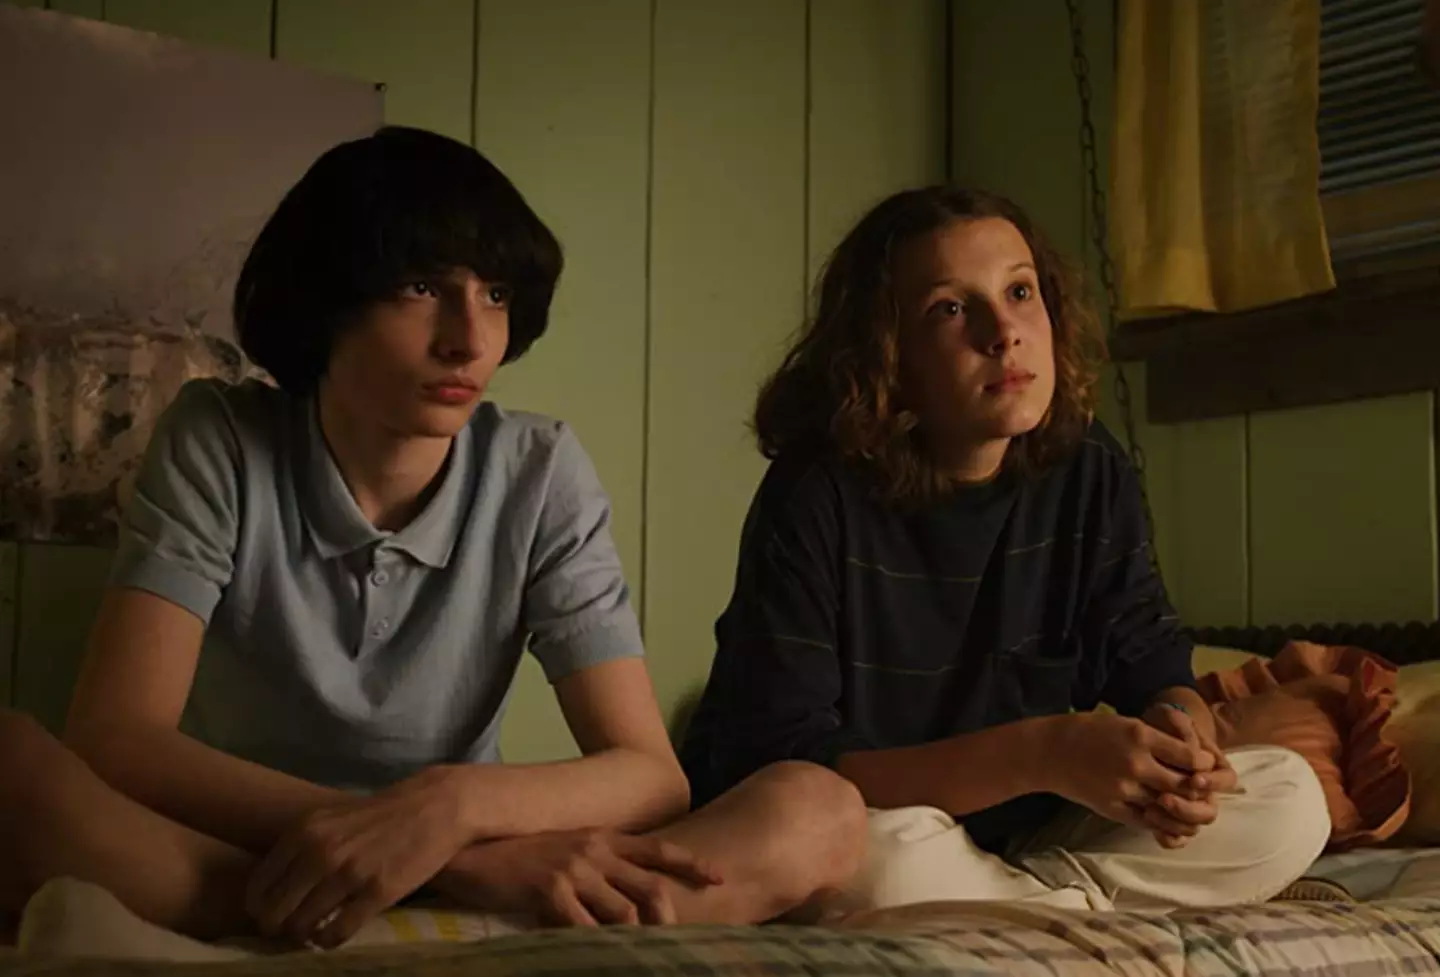 As well as her intense character development, Millie Bobby Brown also reflected on Eleven's relationship with Finn Wolfhard's Mike.